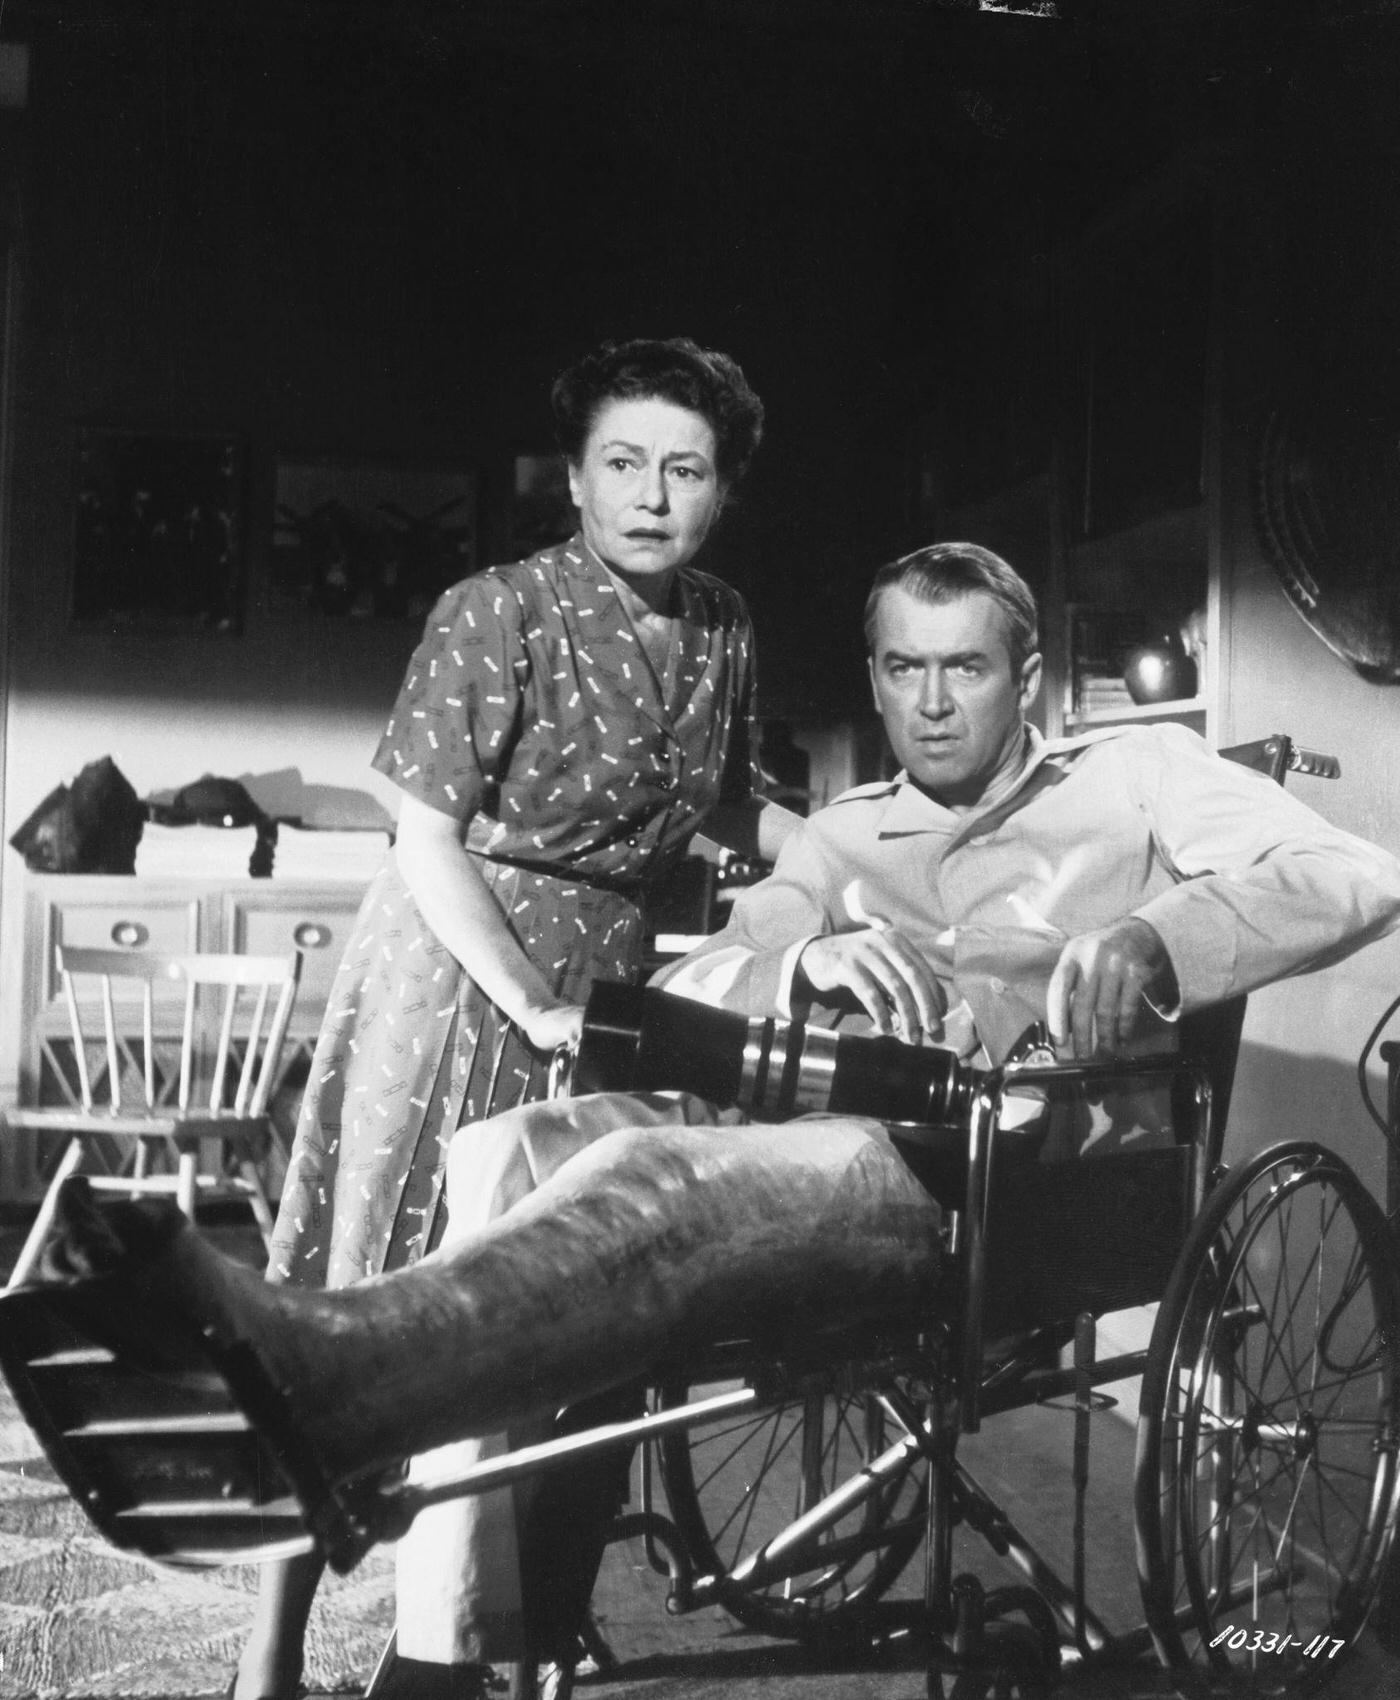 Wheelchair bound James Stewart with his nurse Thelma Ritter in a scene from Alfred Hitchcock's 'Rear Window'